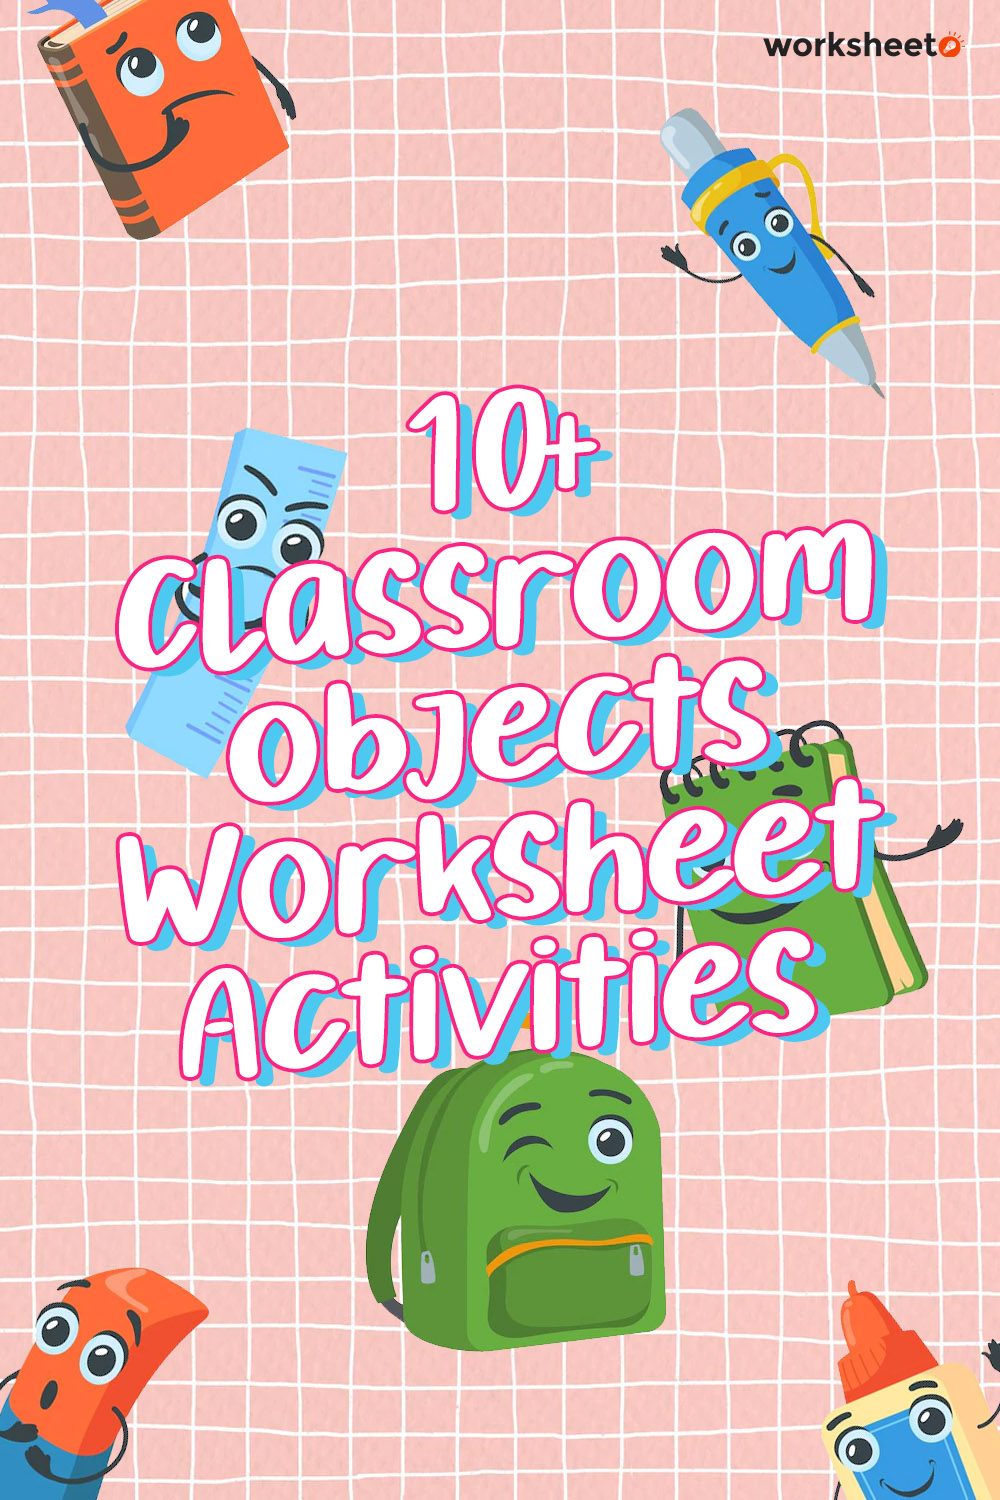 14 Images of Classroom Objects Worksheet Activities